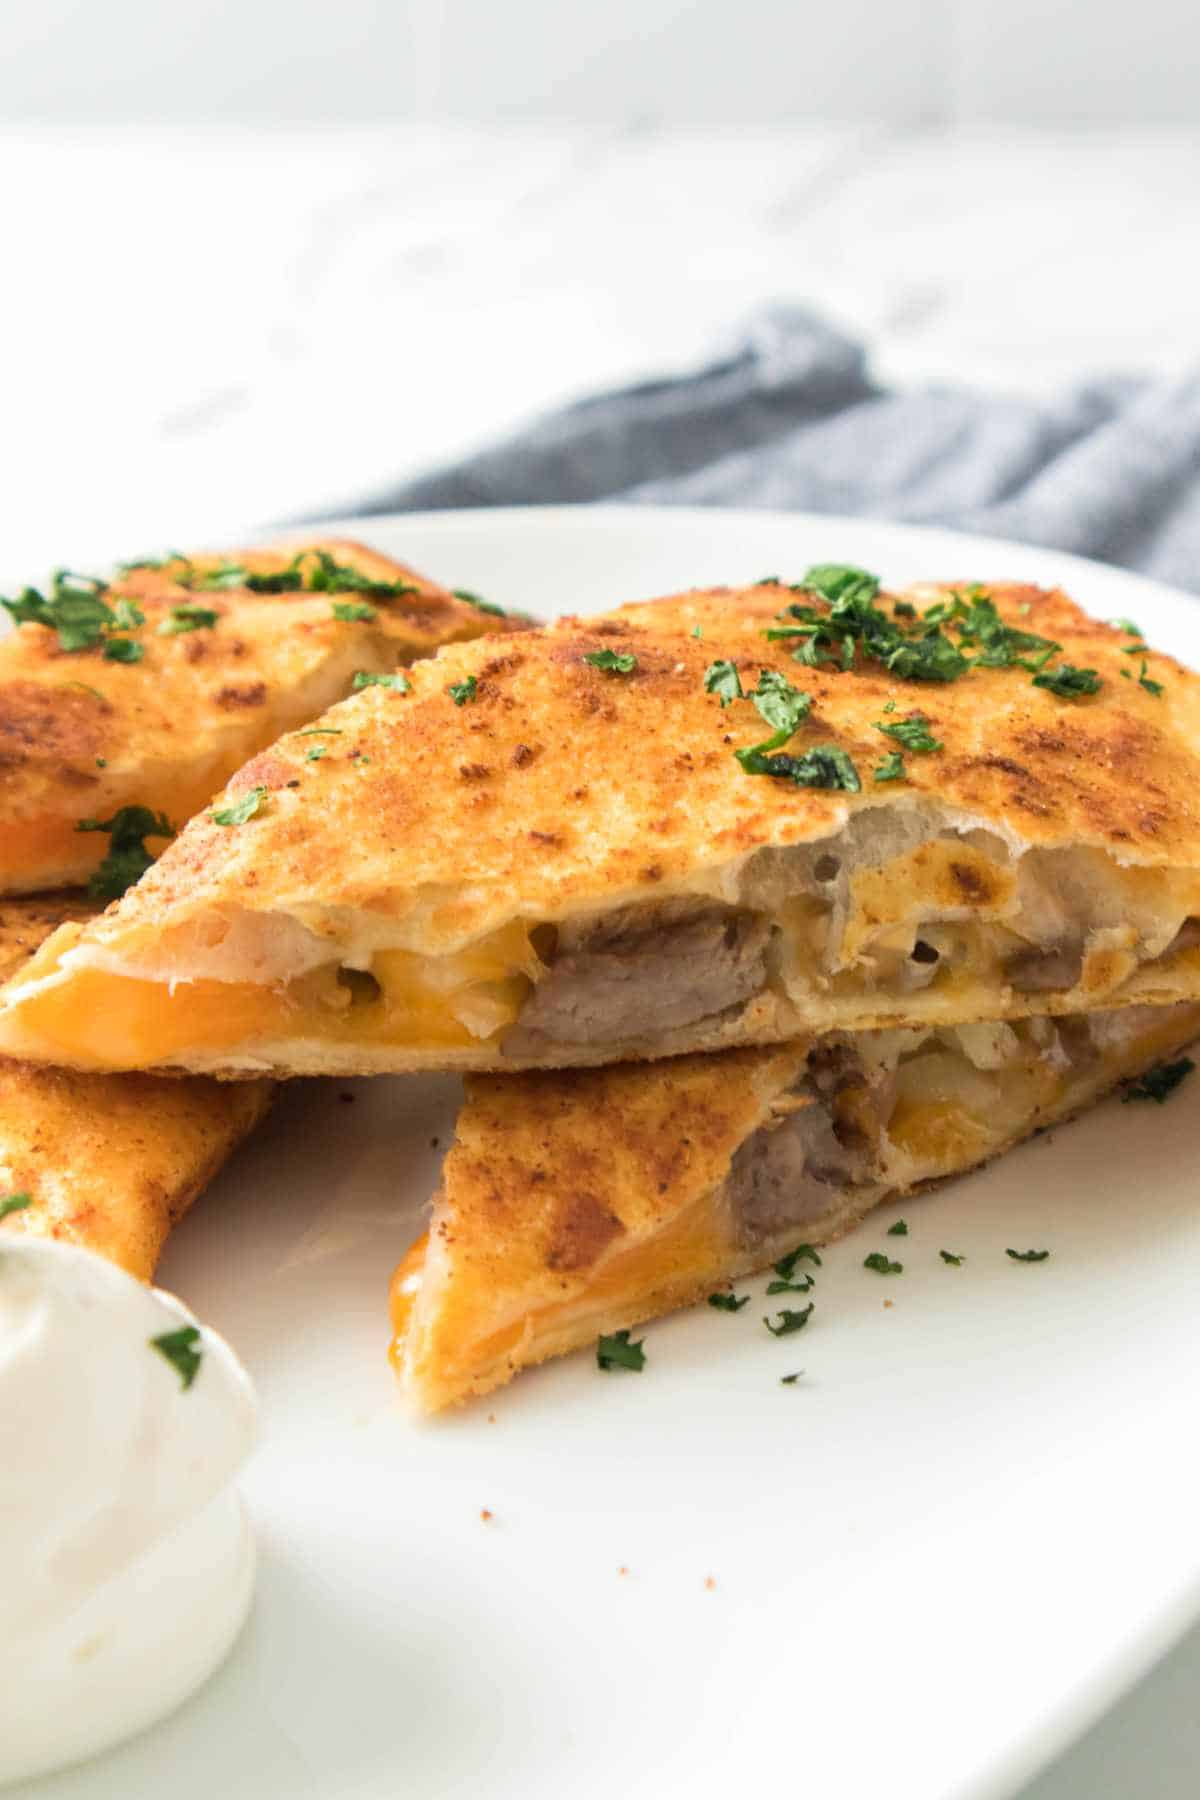 steak quesadilla cut into three triangles and served with sour cream or Mexican white sauce.